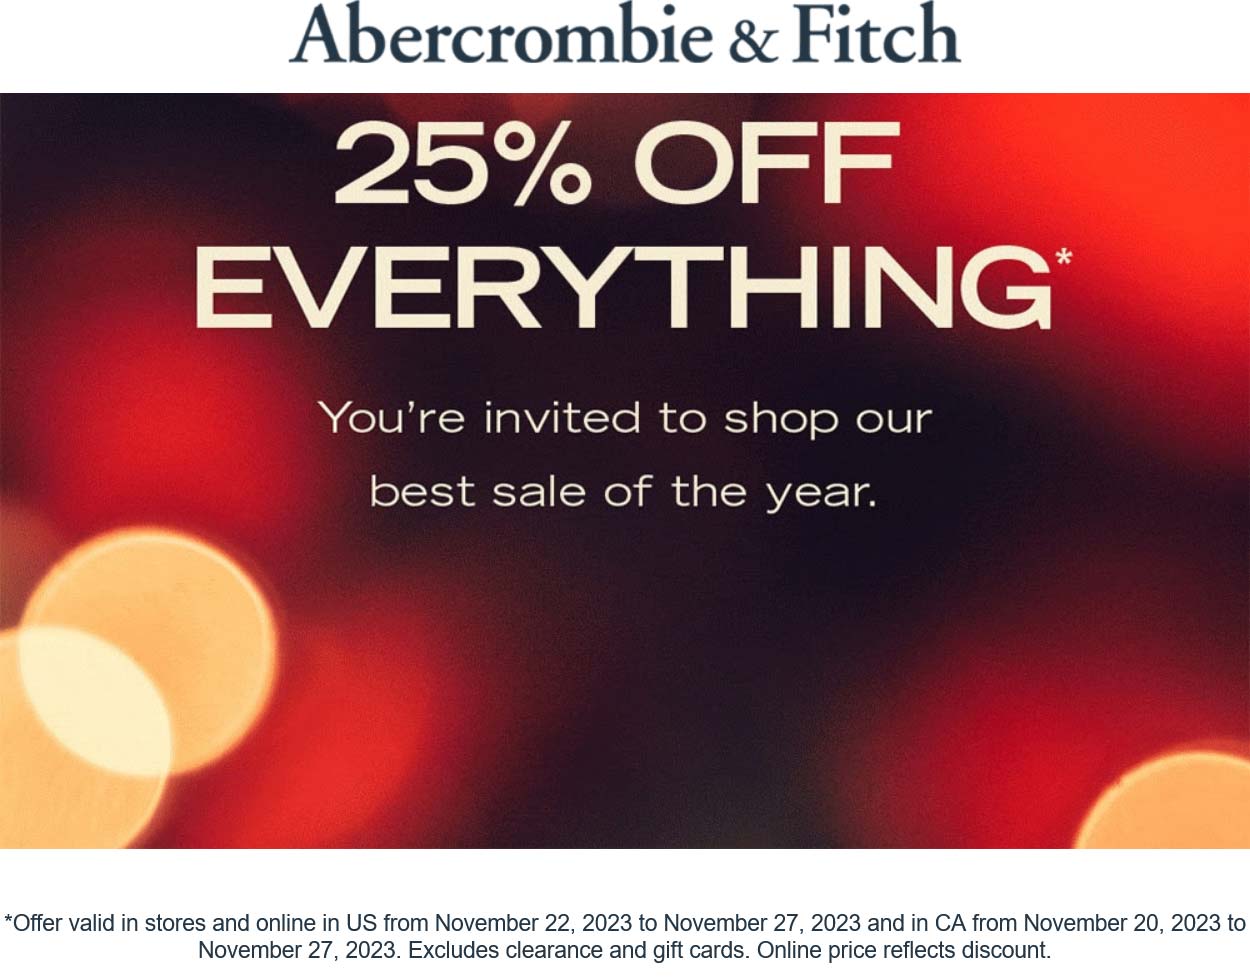 Abercrombie & Fitch stores Coupon  25% off everything at Abercrombie & Fitch, ditto online #abercrombiefitch 